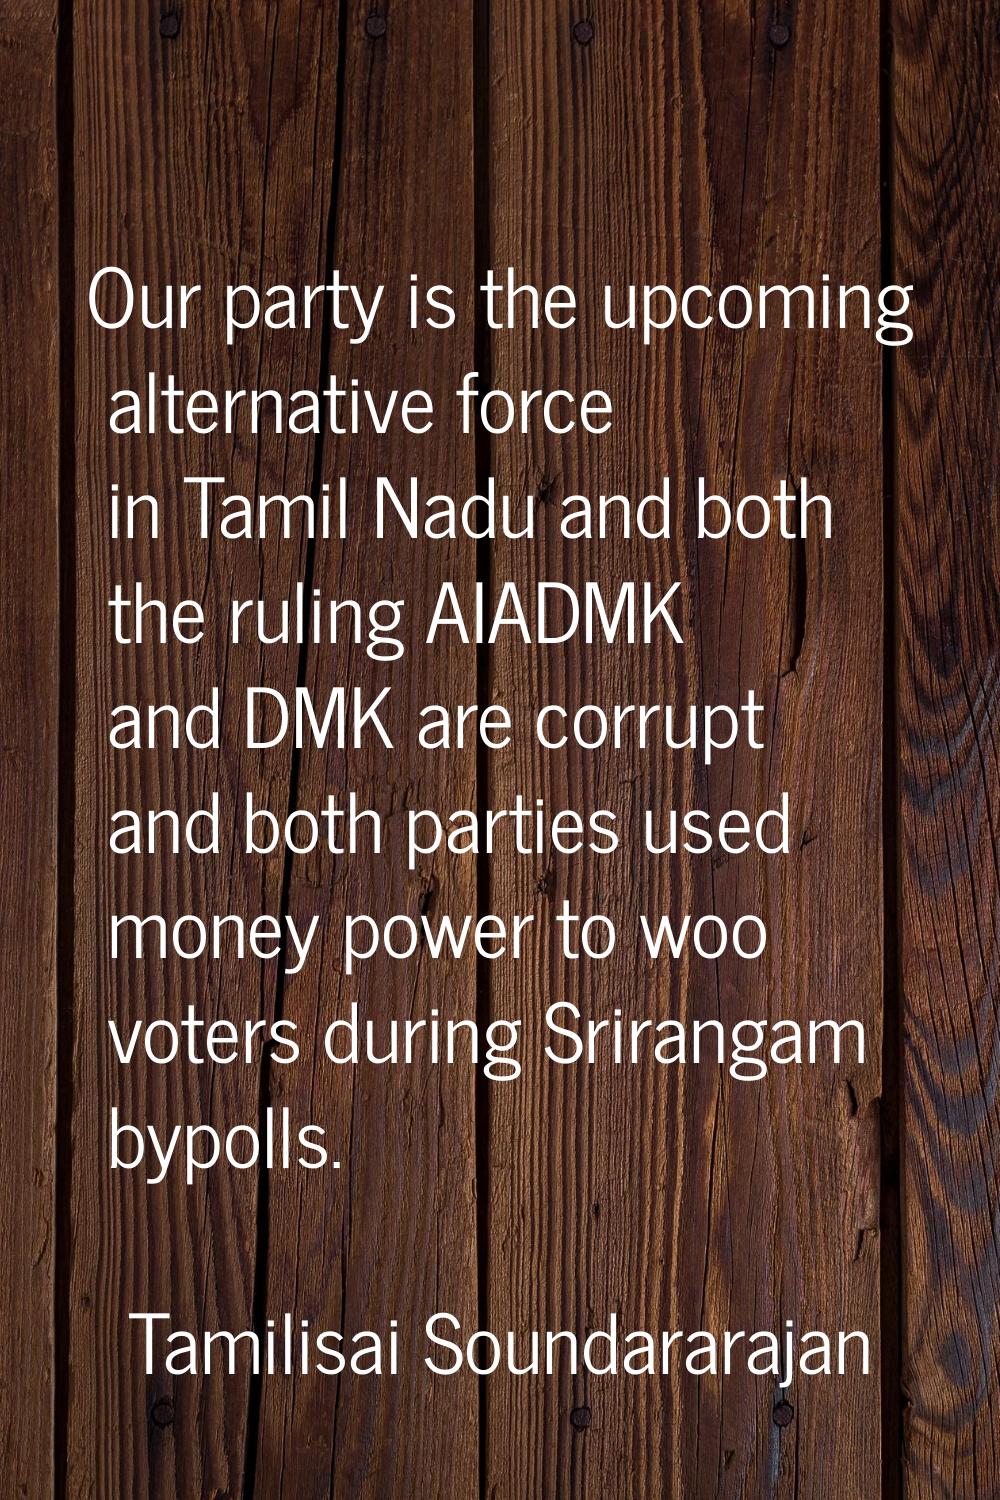 Our party is the upcoming alternative force in Tamil Nadu and both the ruling AIADMK and DMK are co